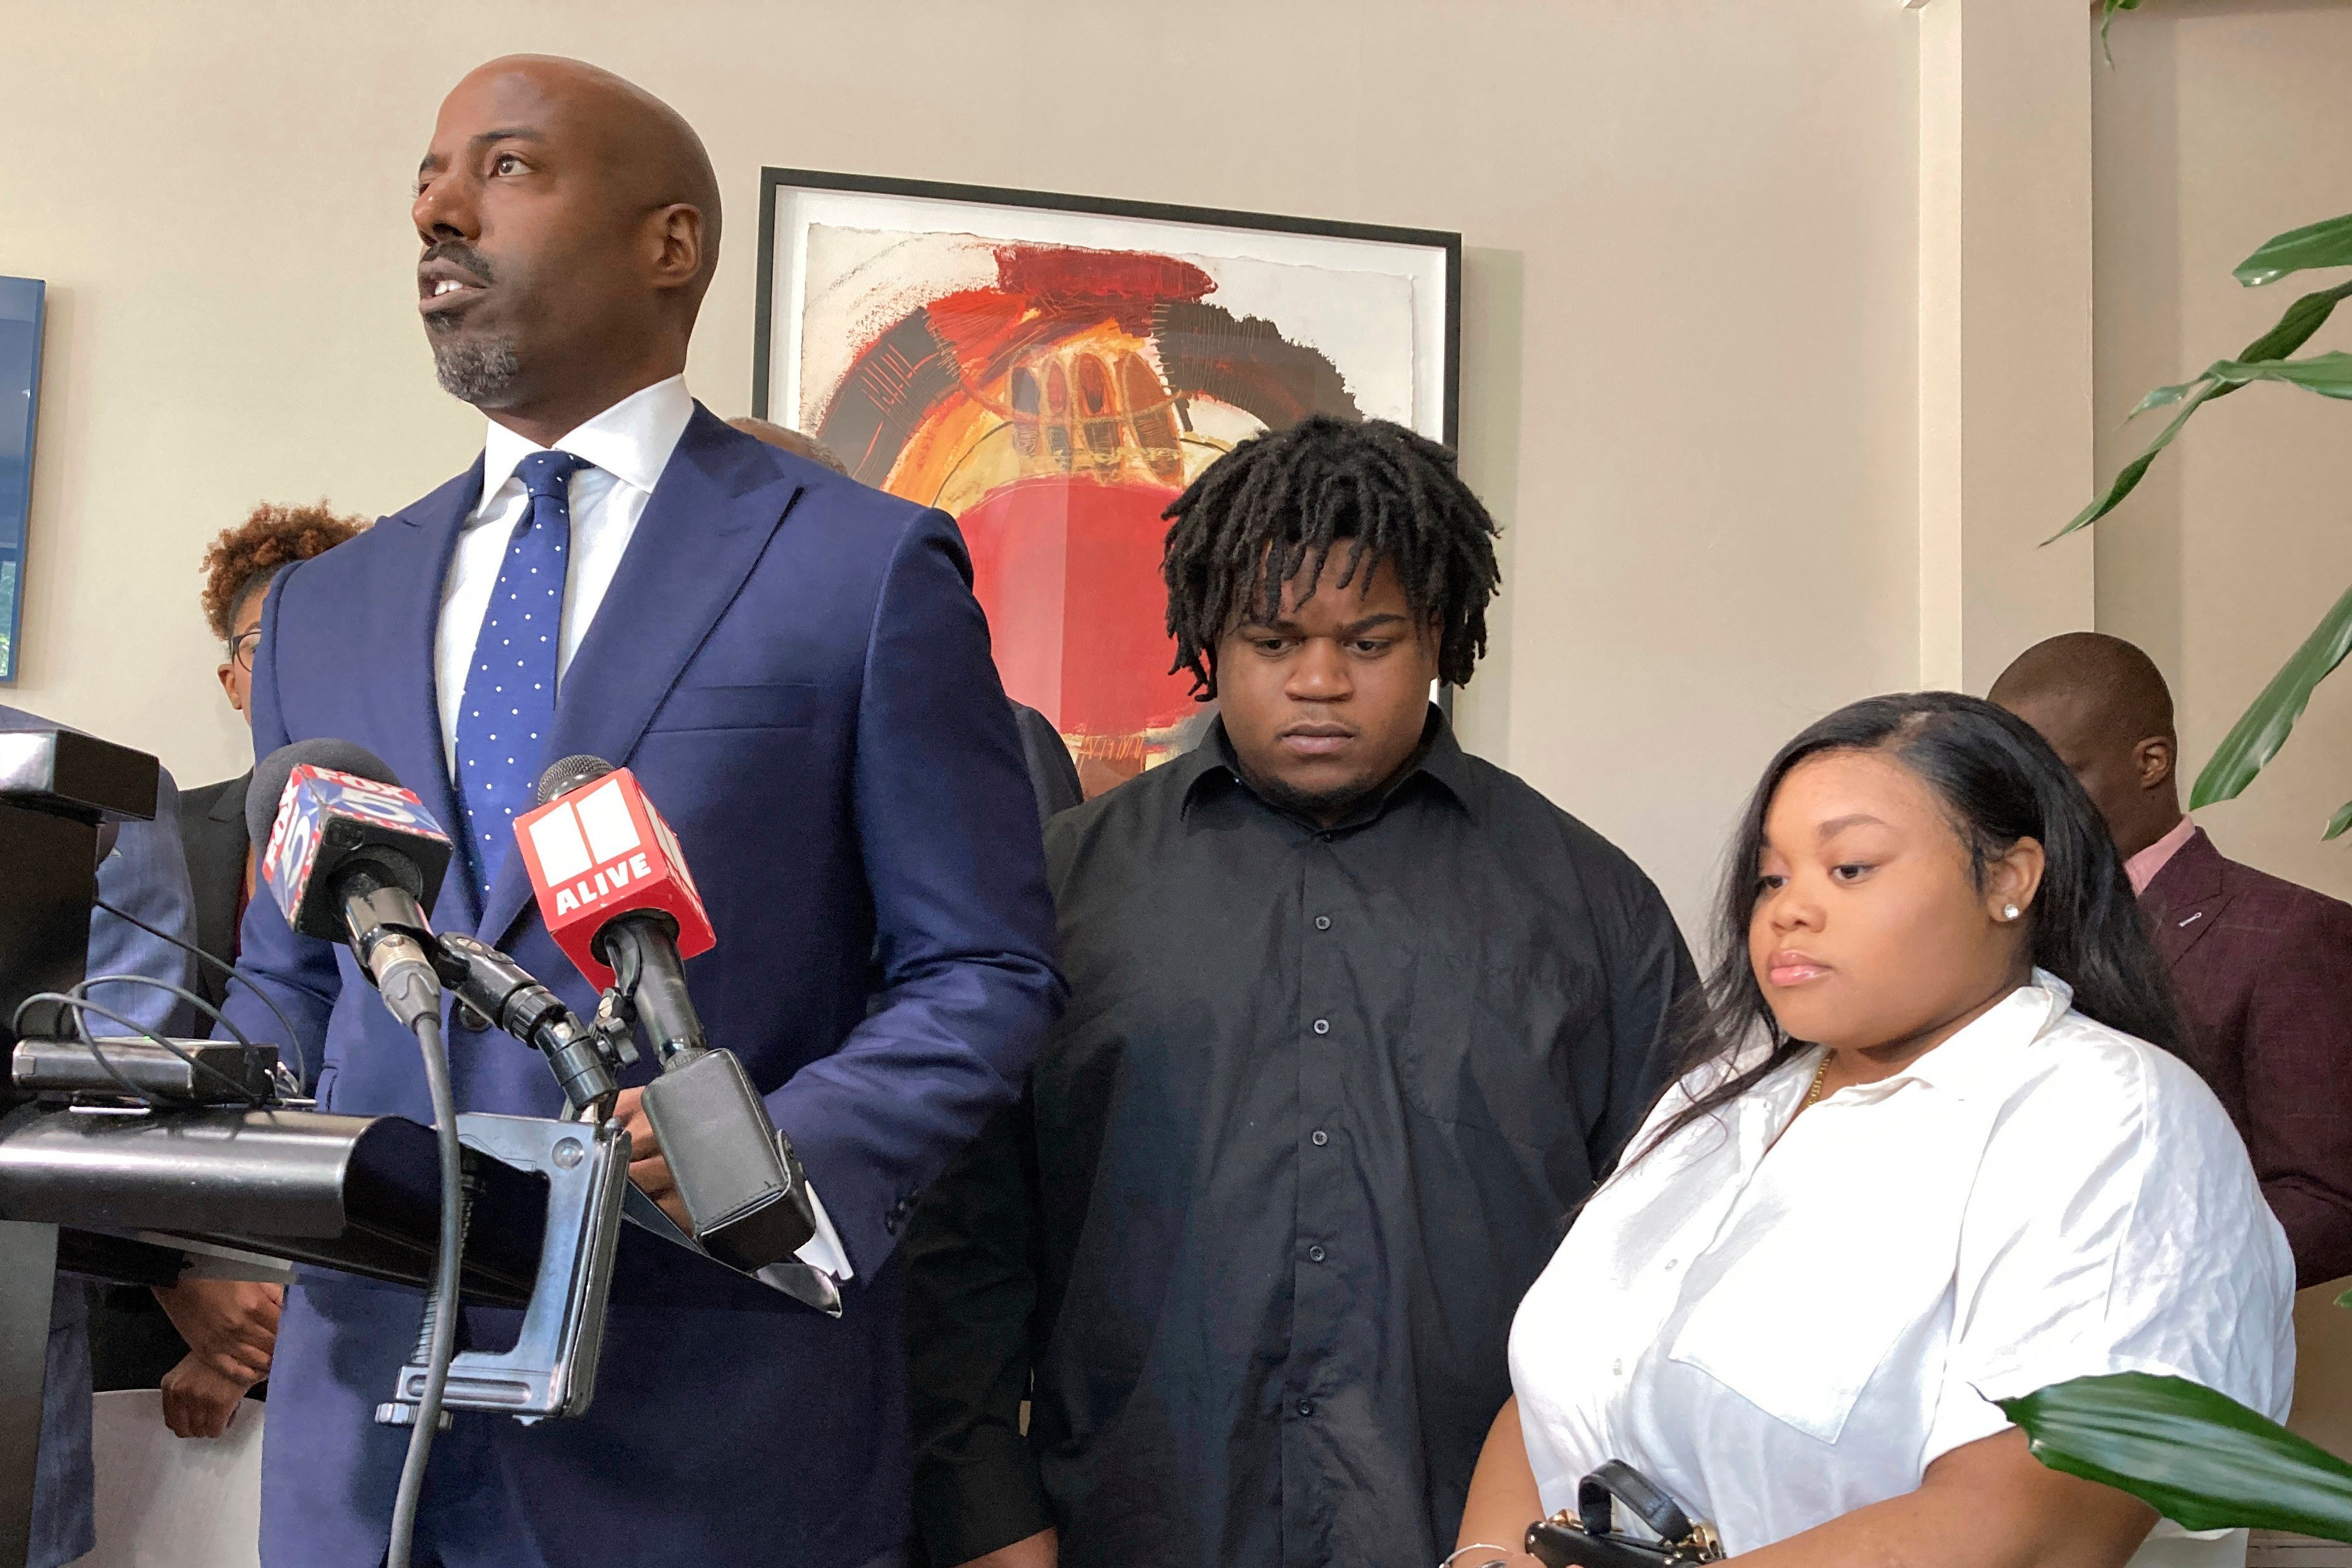 Lawyer Cory Lynch, joined by clients Treveon Isaiah Taylor Snr and Jessica Ross, speaks during a news conference in Atlanta on Wednesday. Photo: AP